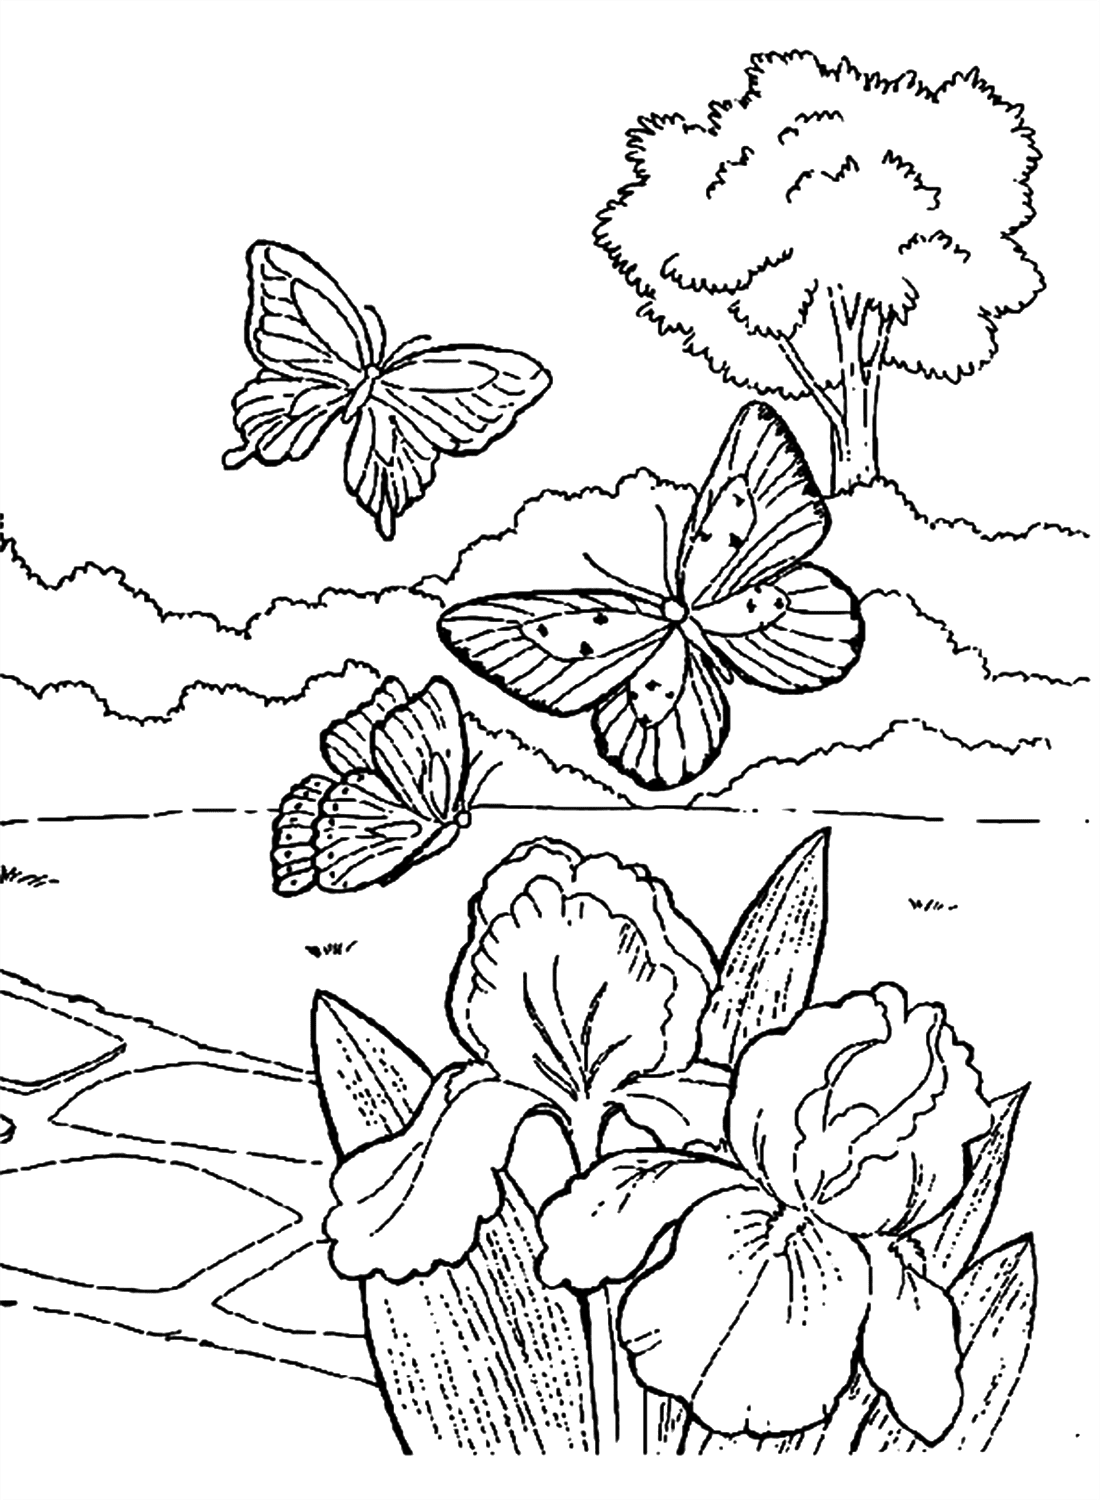 Butterflies Flying in Spring Coloring Pages